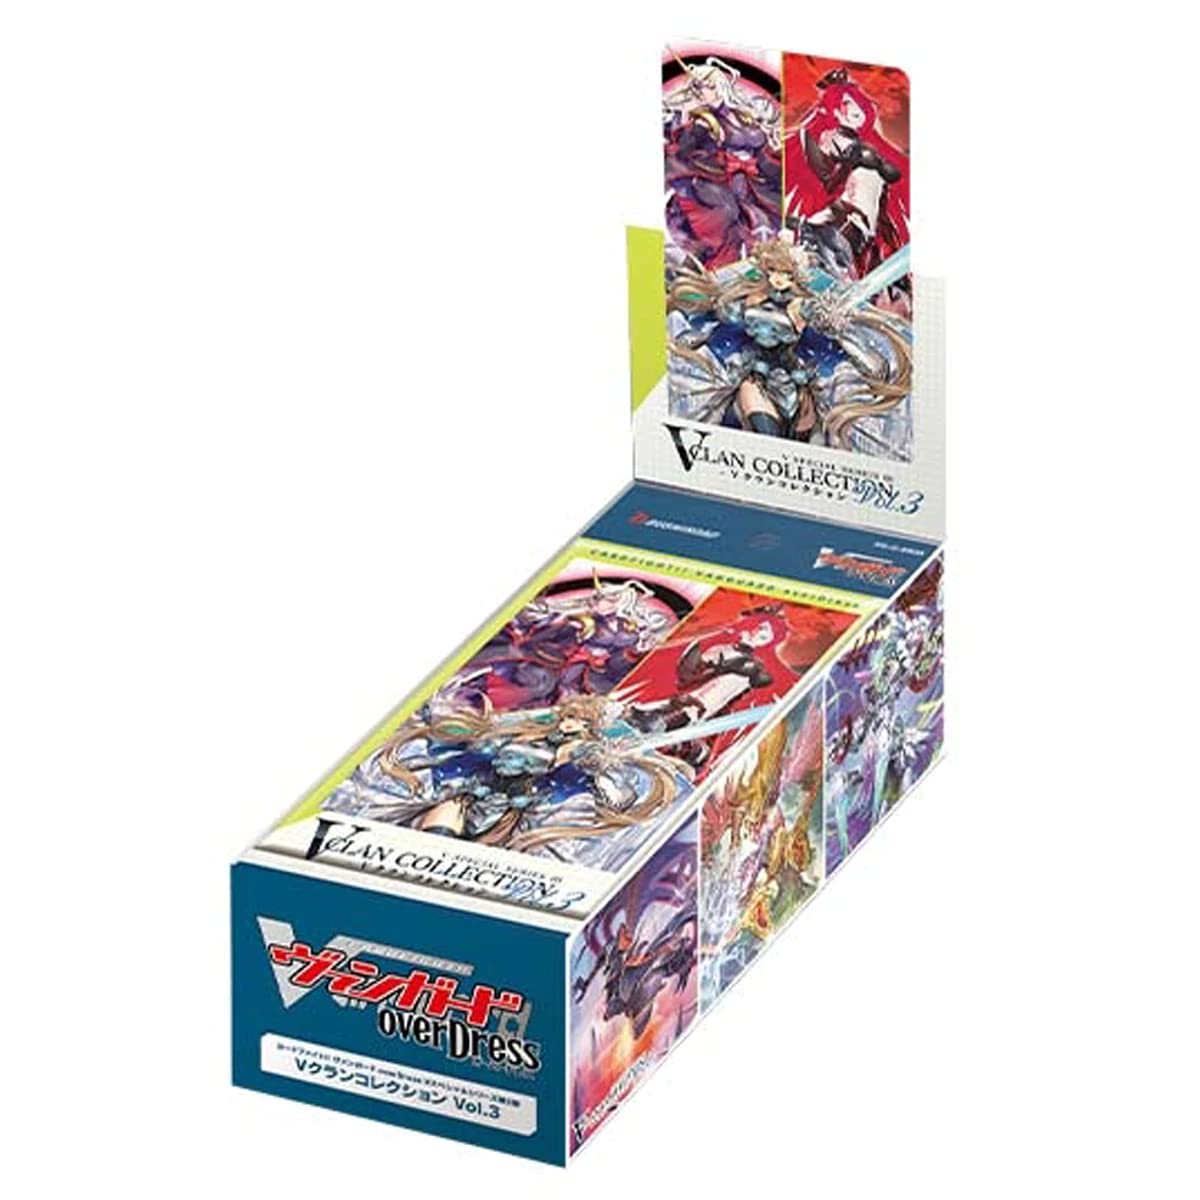 Cardfight Vanguard Over Dress: V CLAN COLLECTION Vol.3: Booster Box  